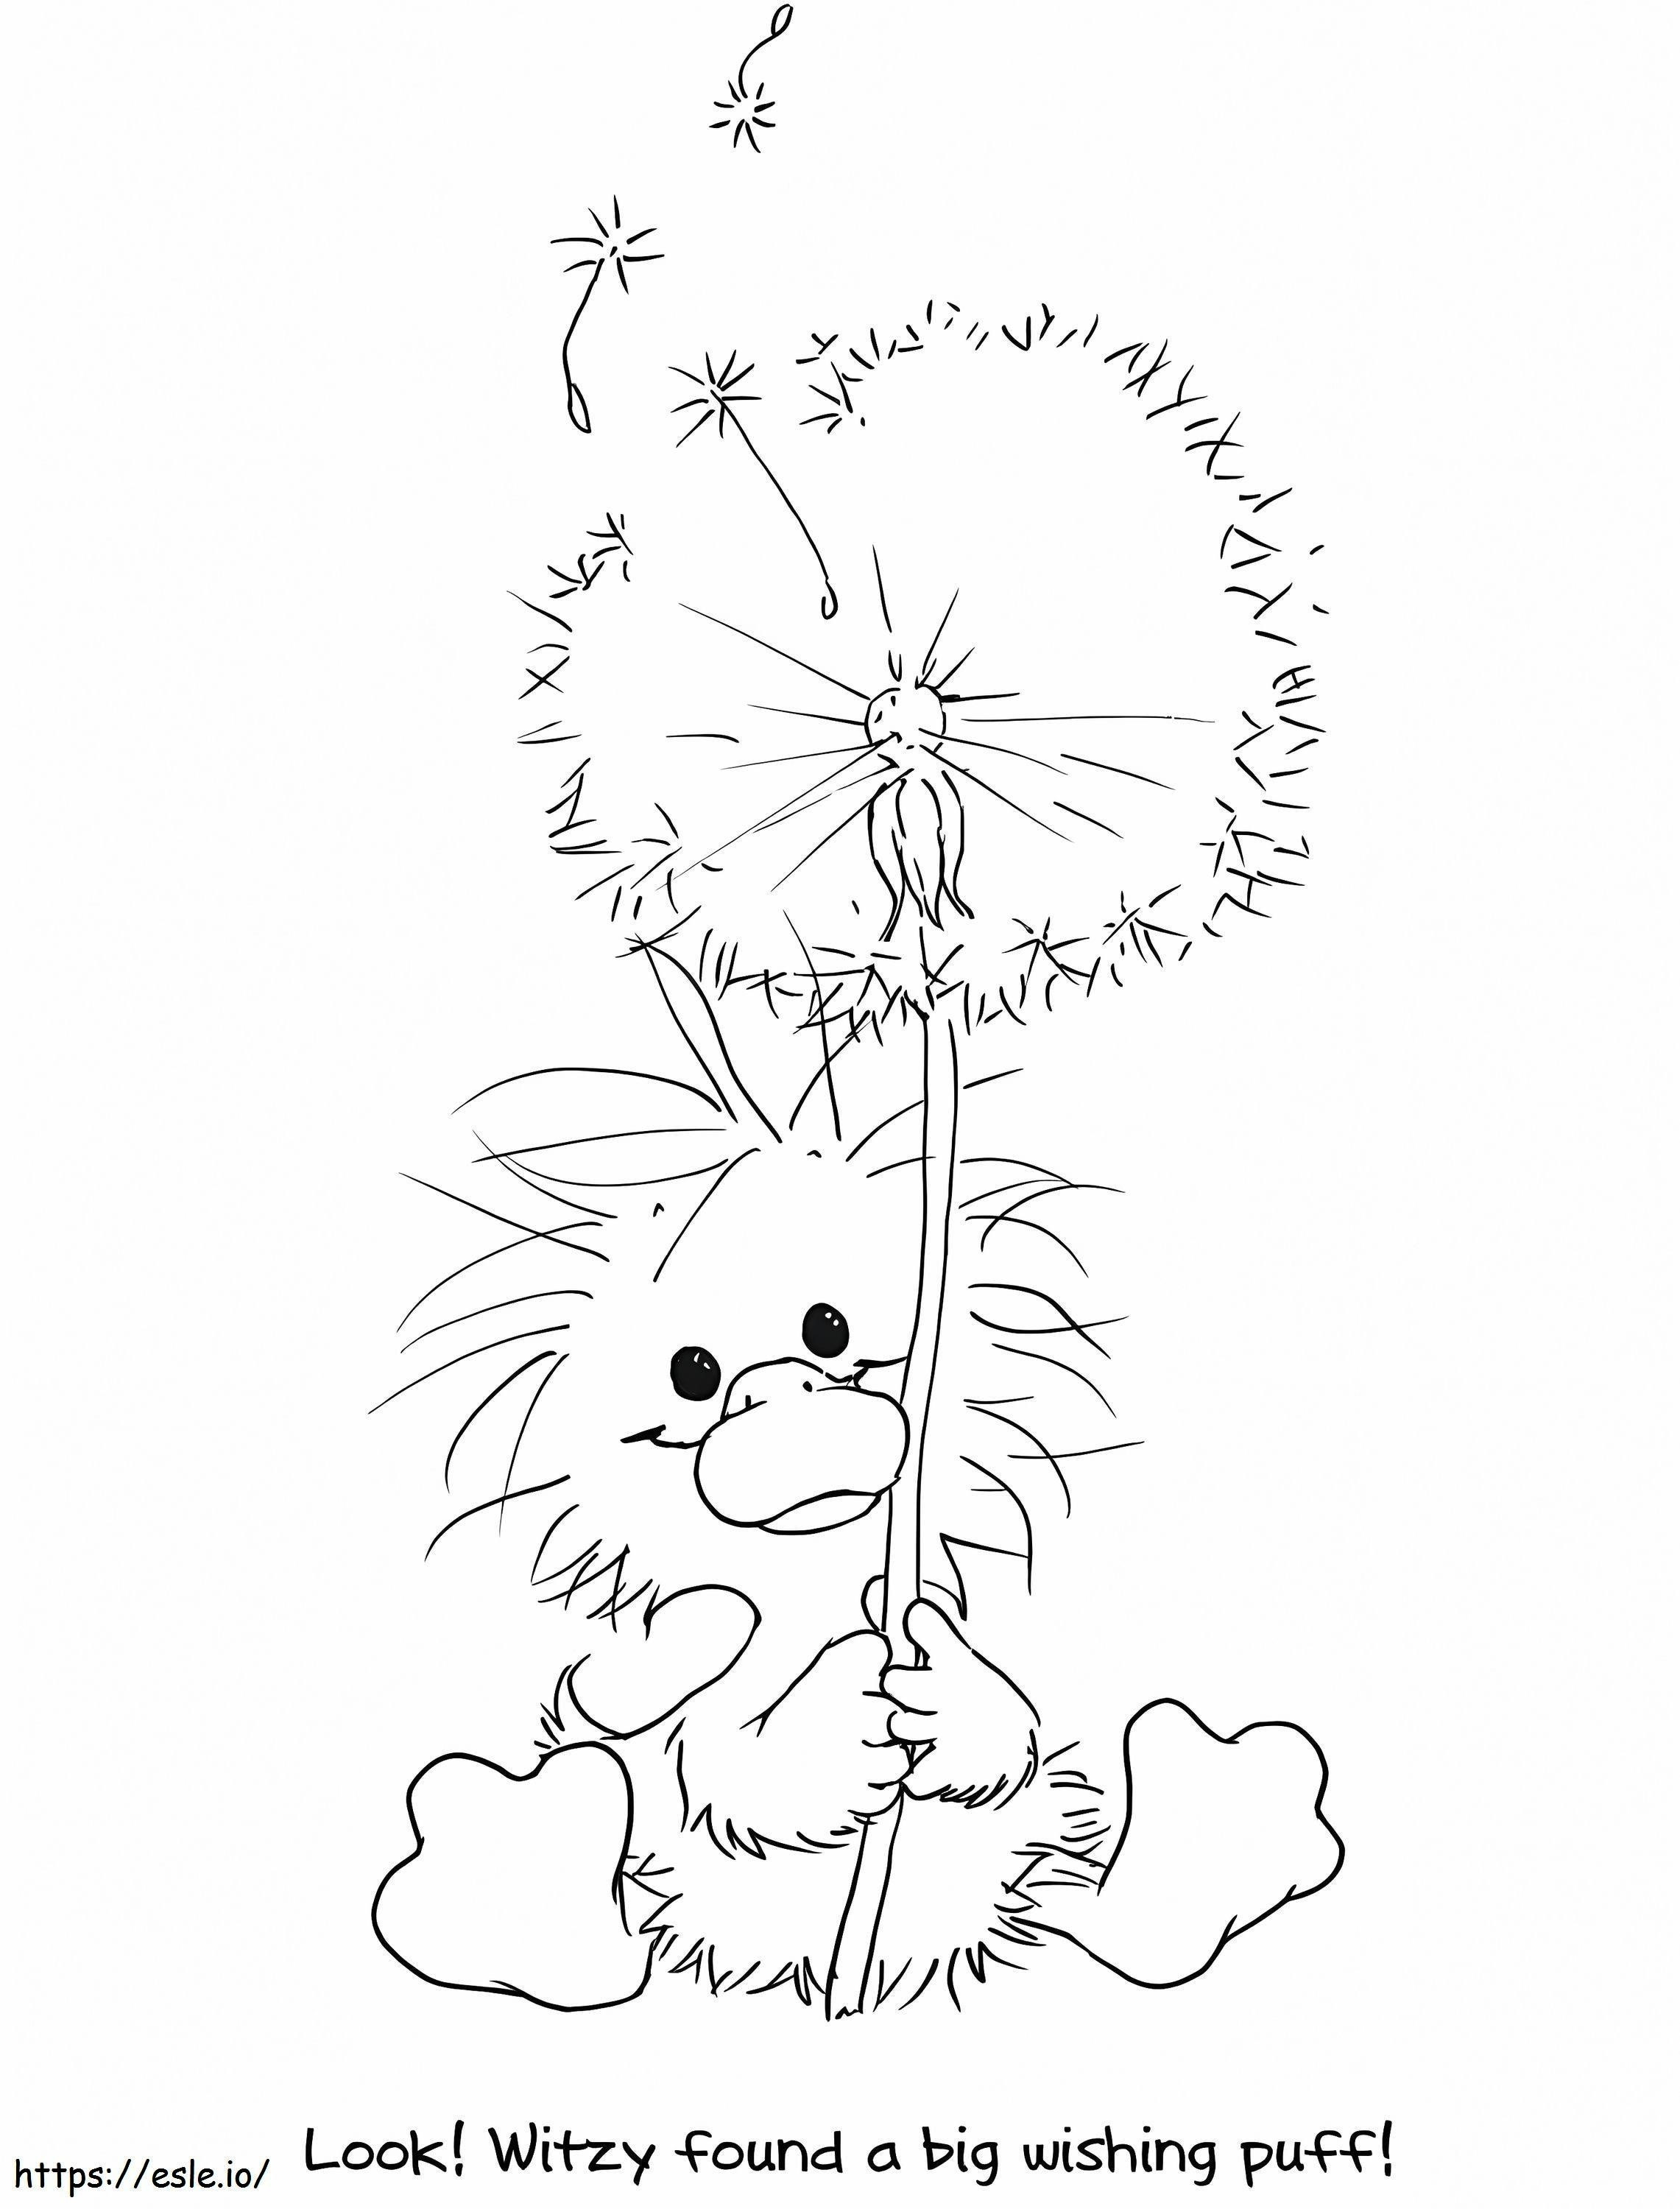 Witzy From Suzys Zoo coloring page